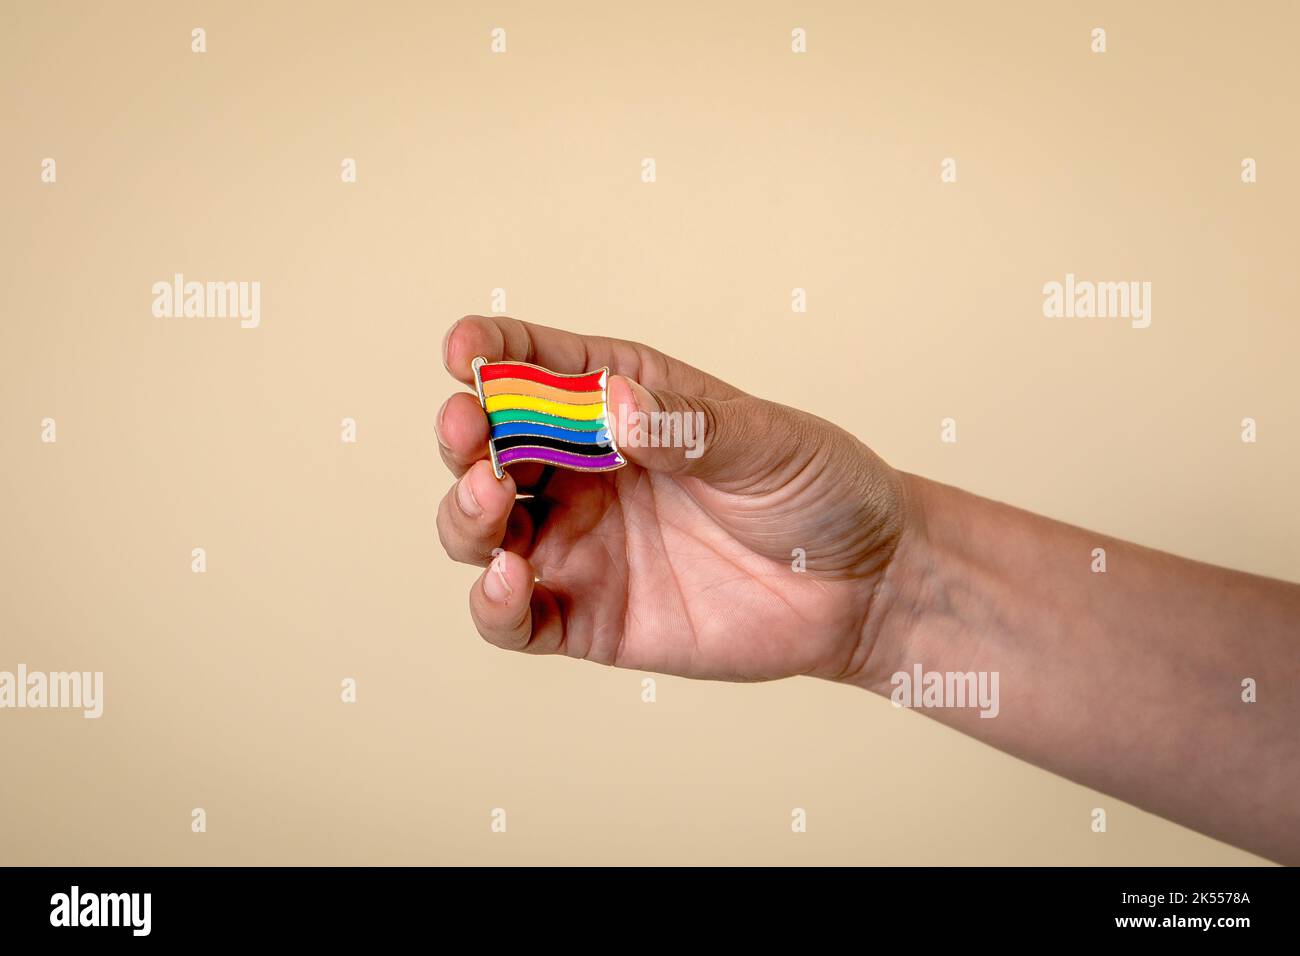 Rainbow colored miniature flag pin in woman's hand. Stock Photo